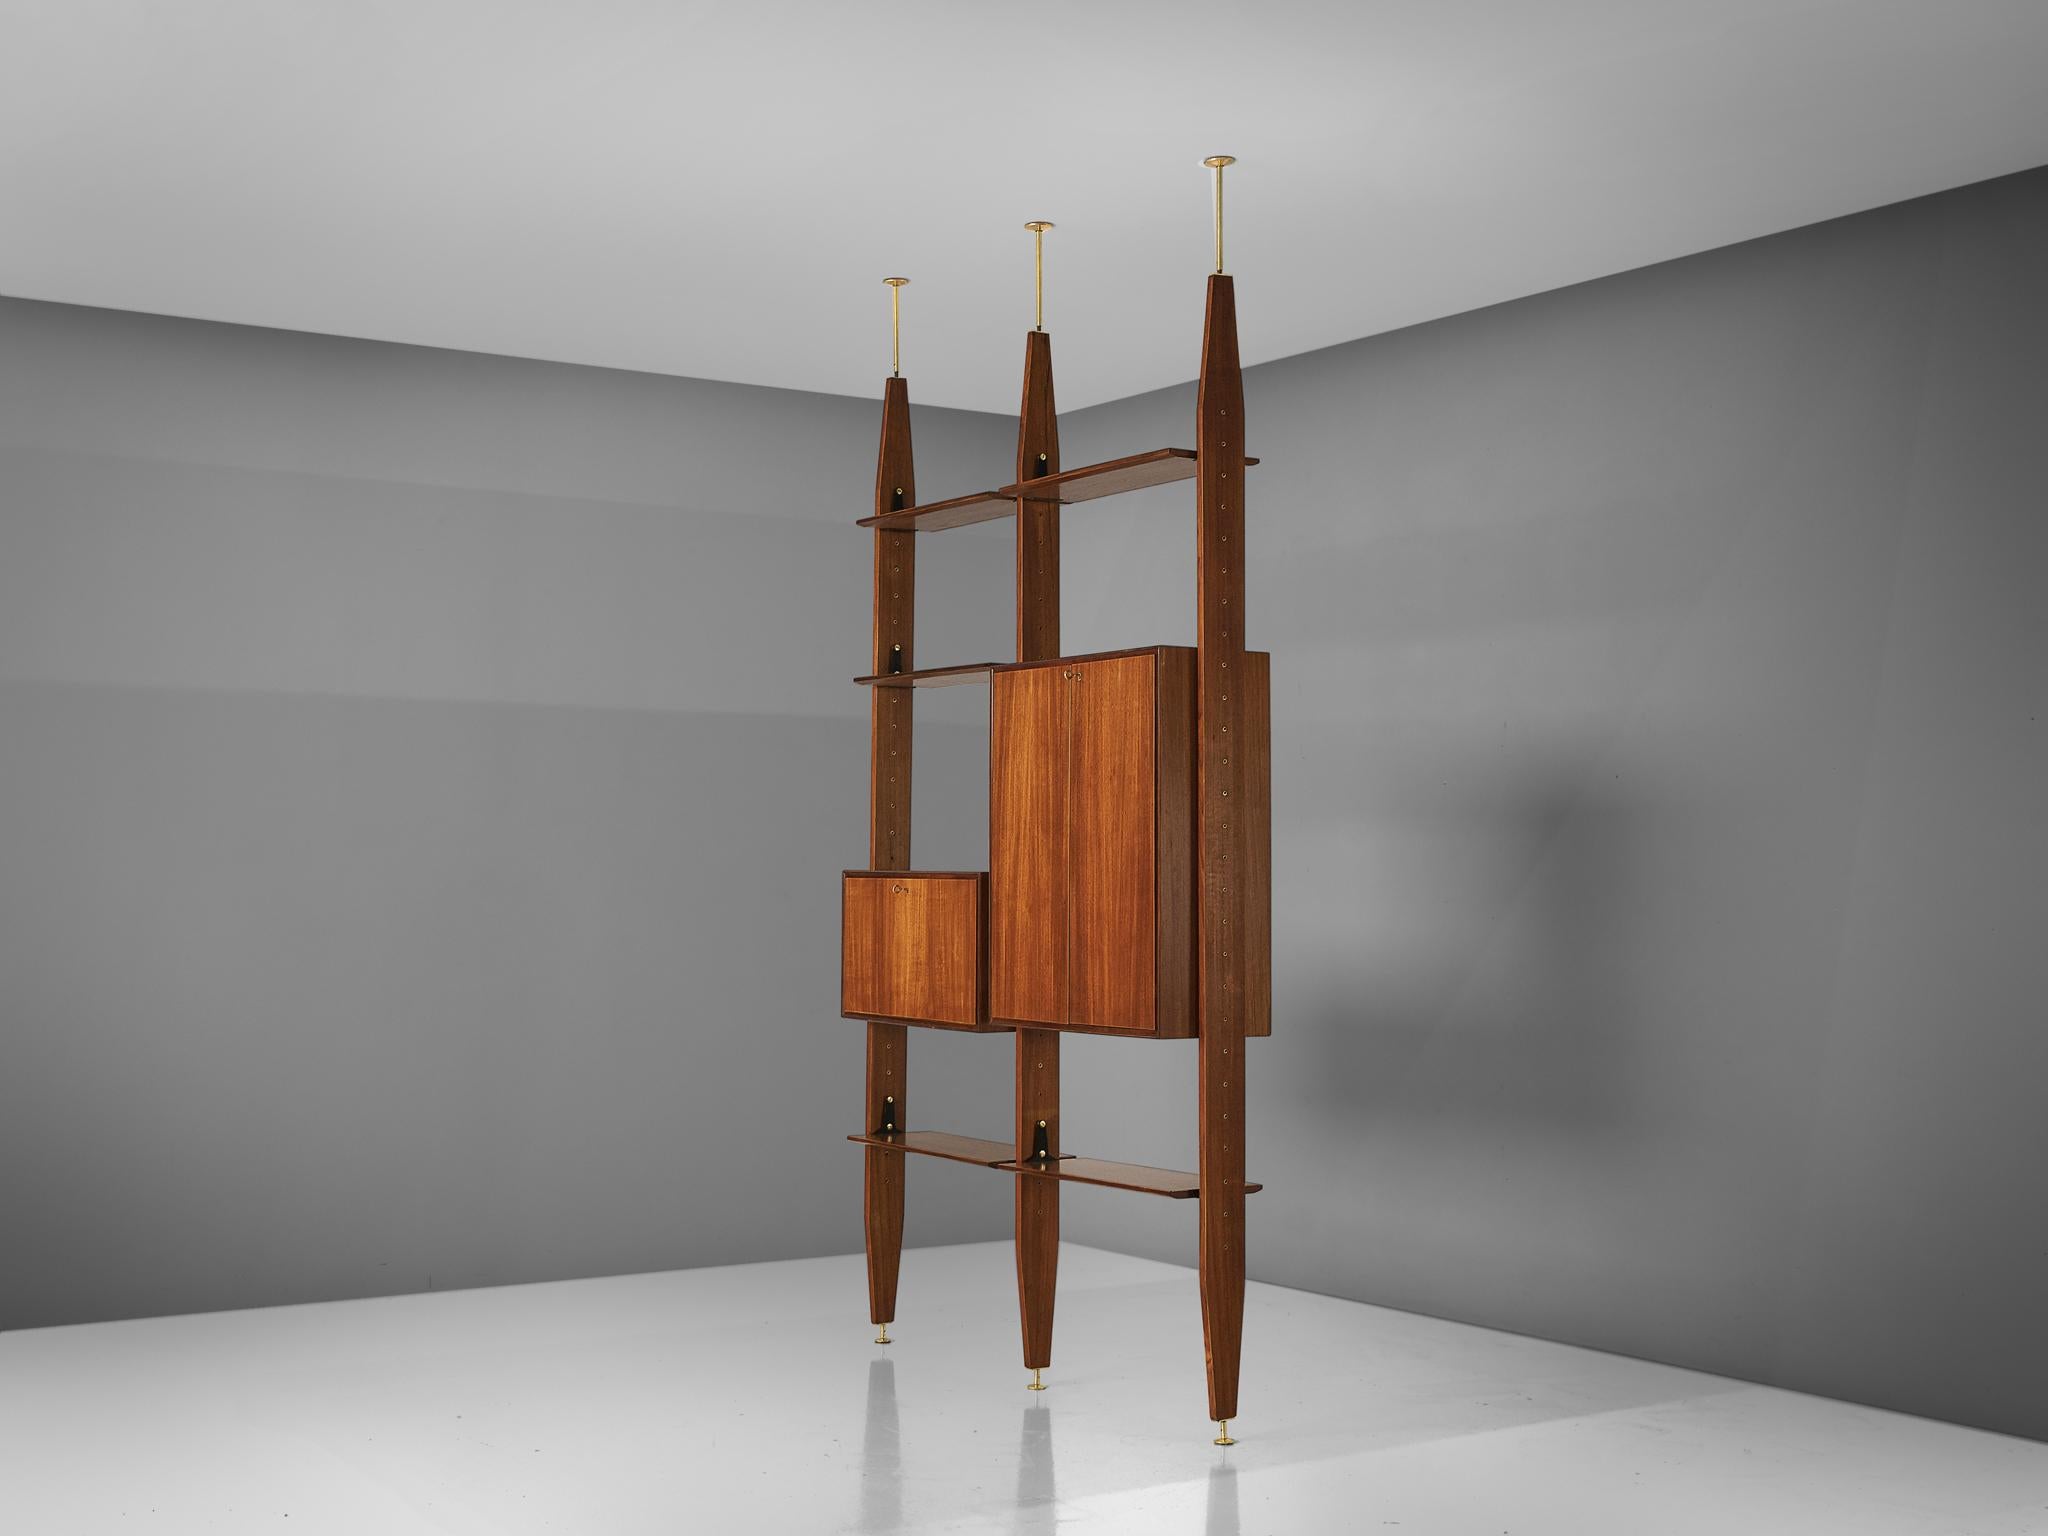 Vittorio Dassi, wall unit book shelf, in Brasillian hardwood and brass, Italy, 1960s.

This book shelf features a three legged structure that can freely be fixed between the ceiling and the floor. In between the legs the shelves and storage space